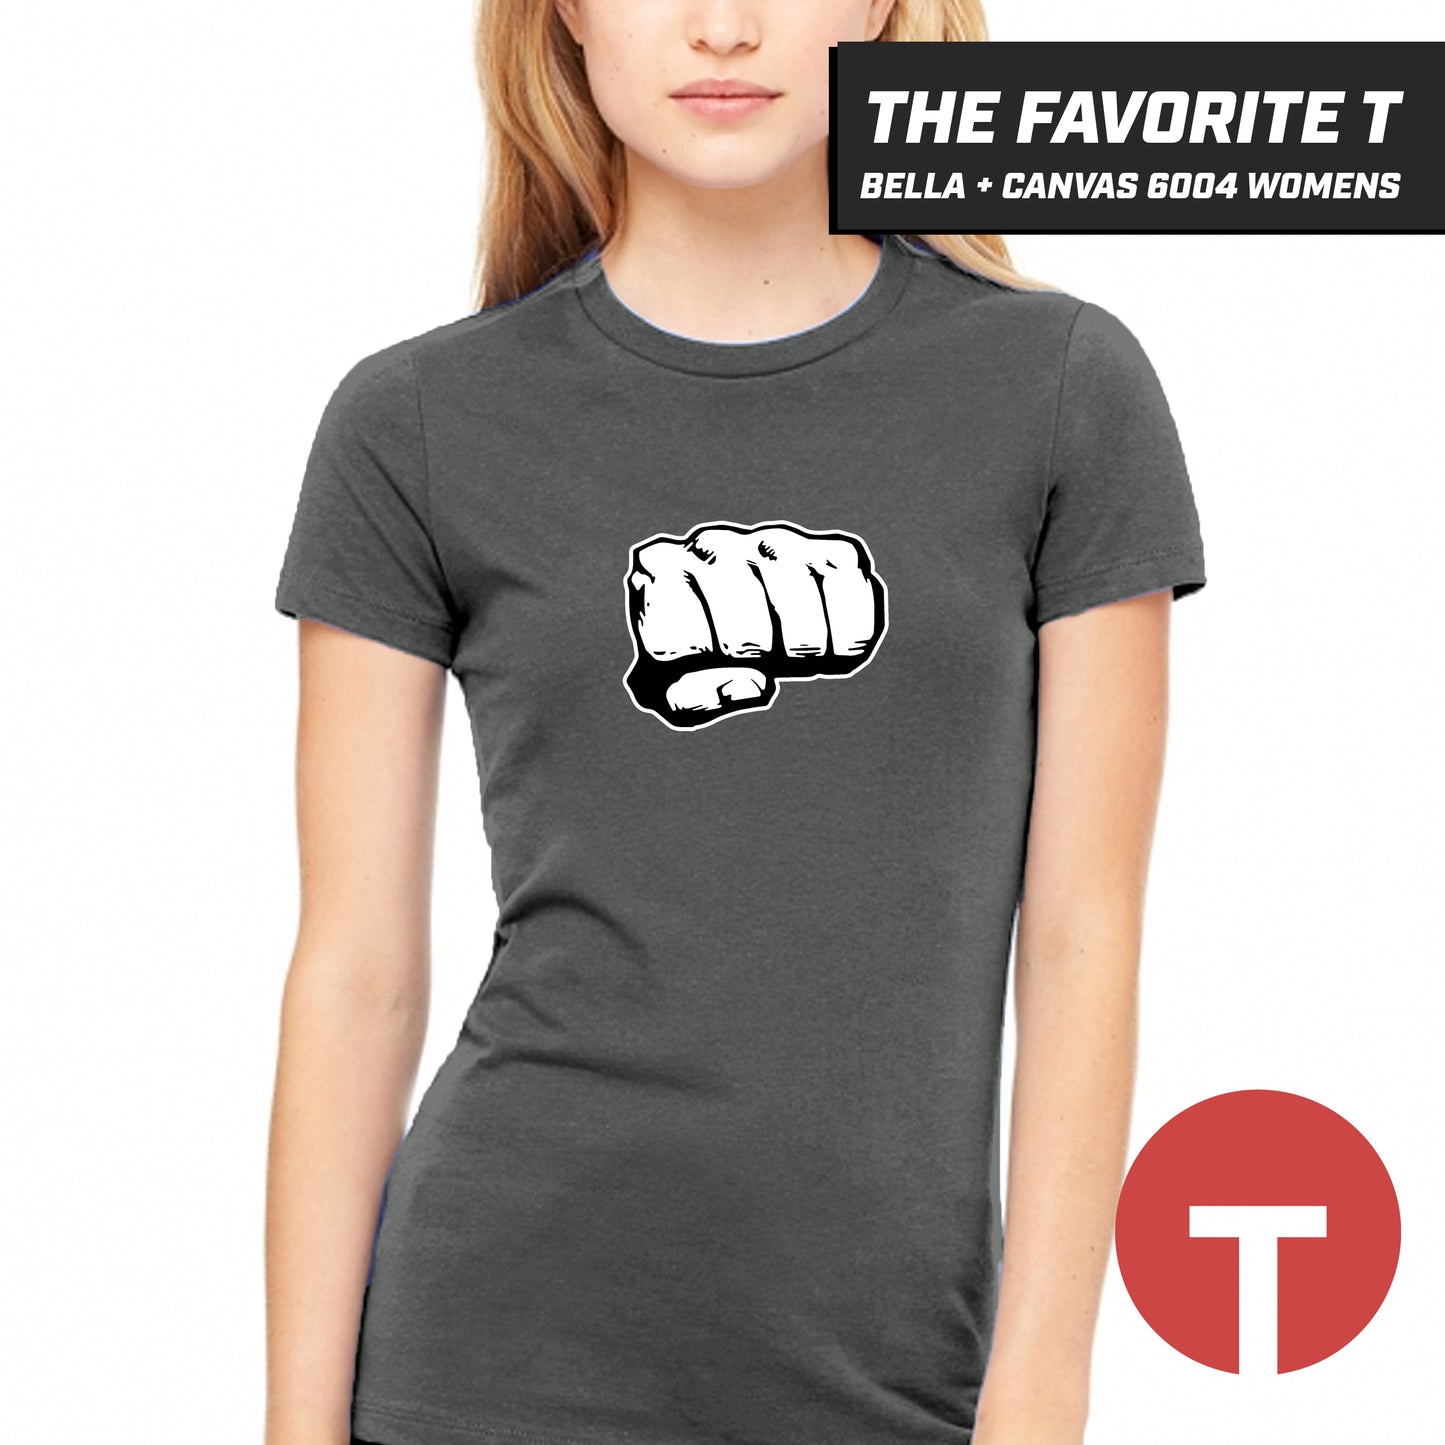 Knuckleheads - Bella+Canvas 6004 Womens "Favorite T"